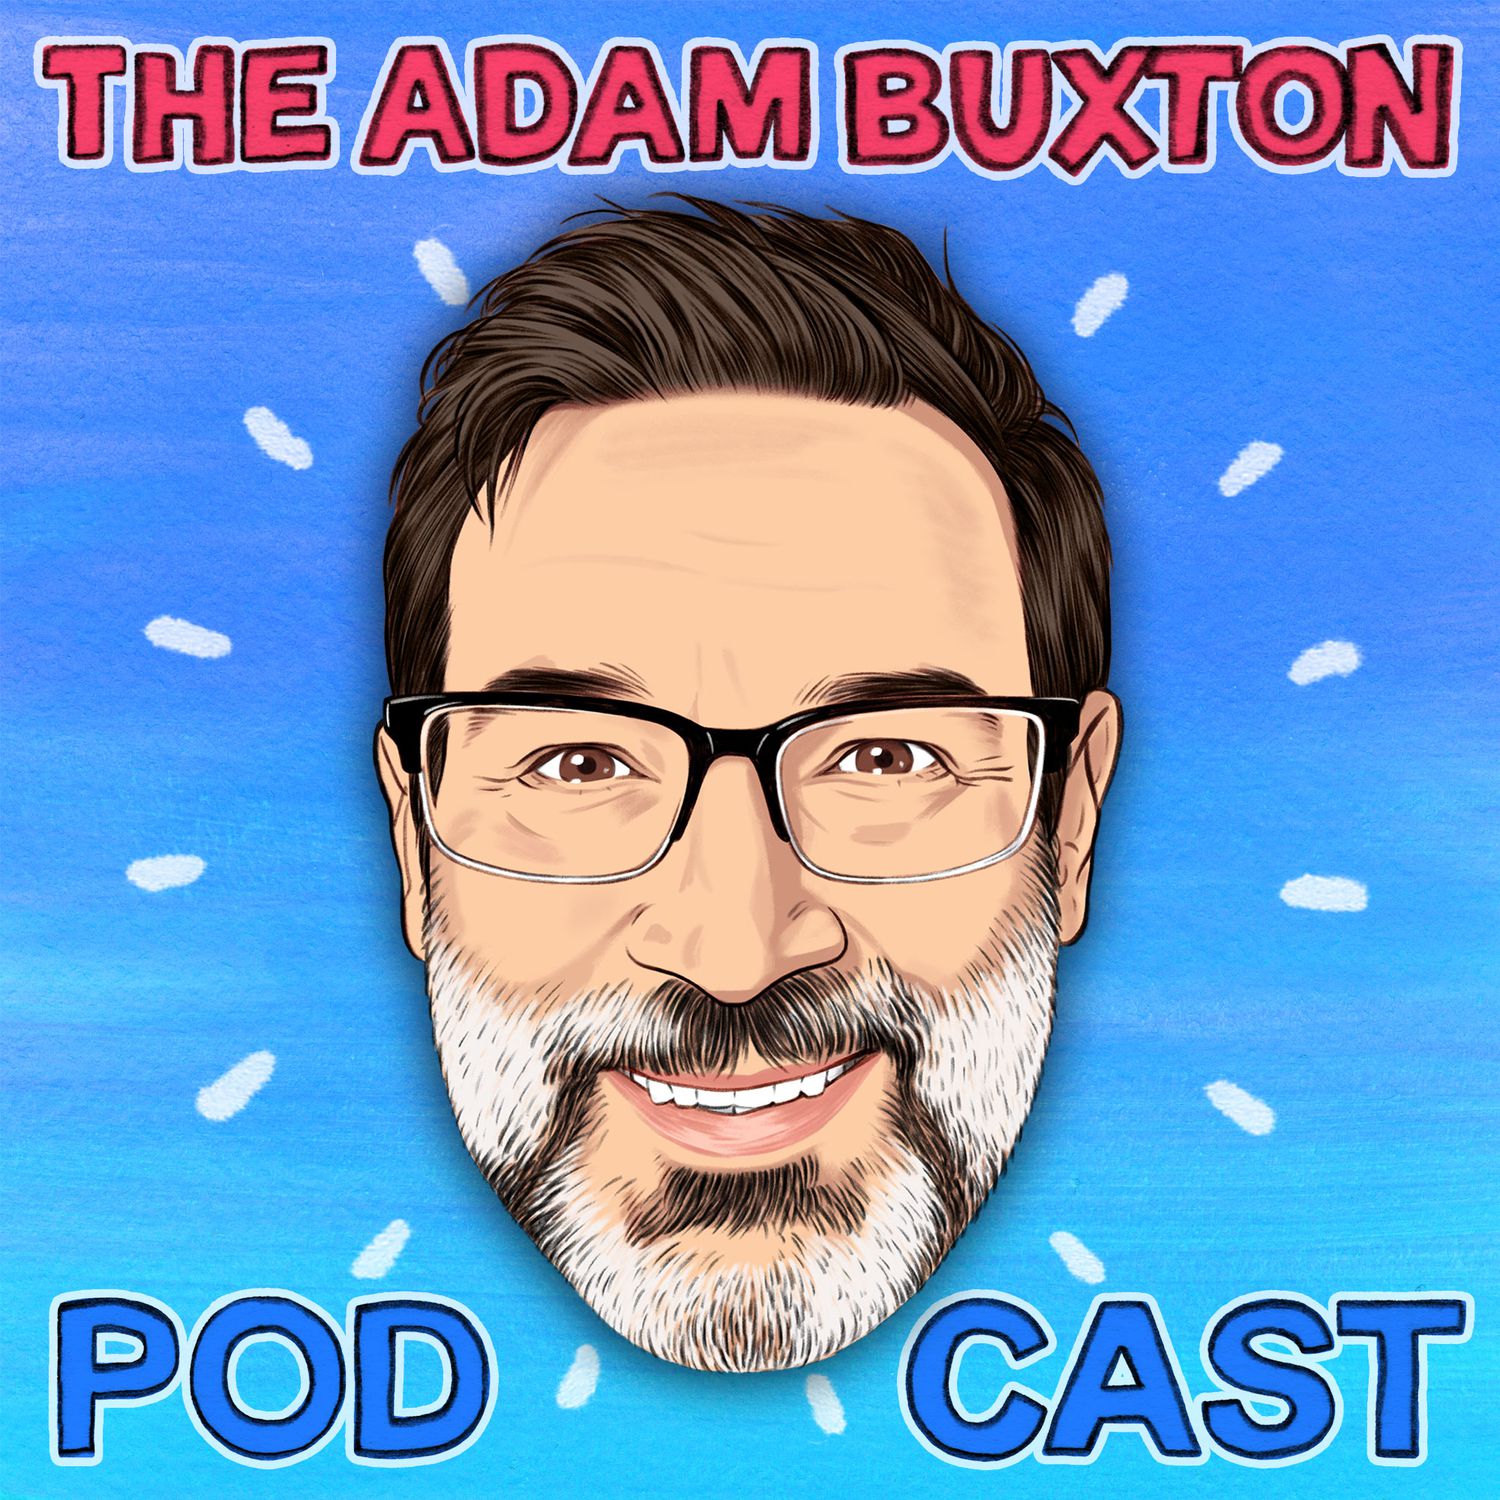 THE ADAM BUXTON PODCAST podcast show image